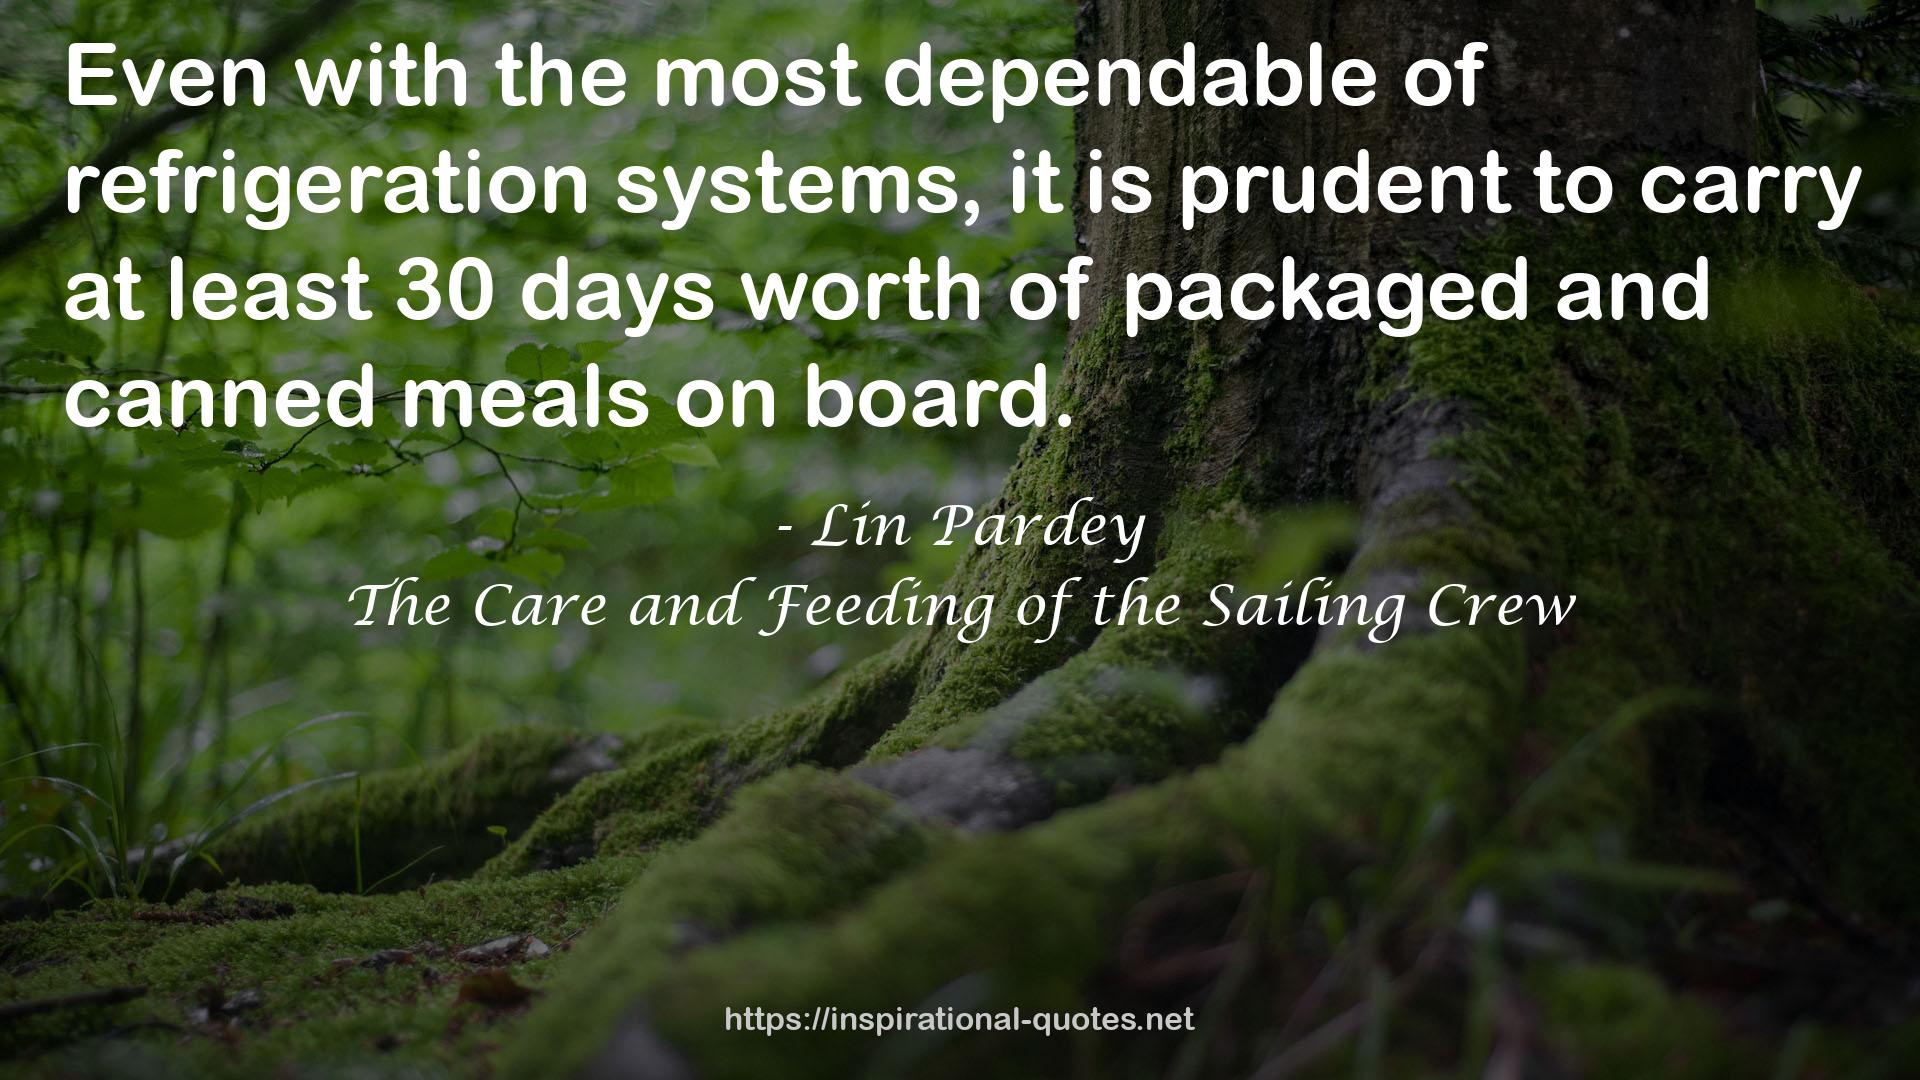 The Care and Feeding of the Sailing Crew QUOTES